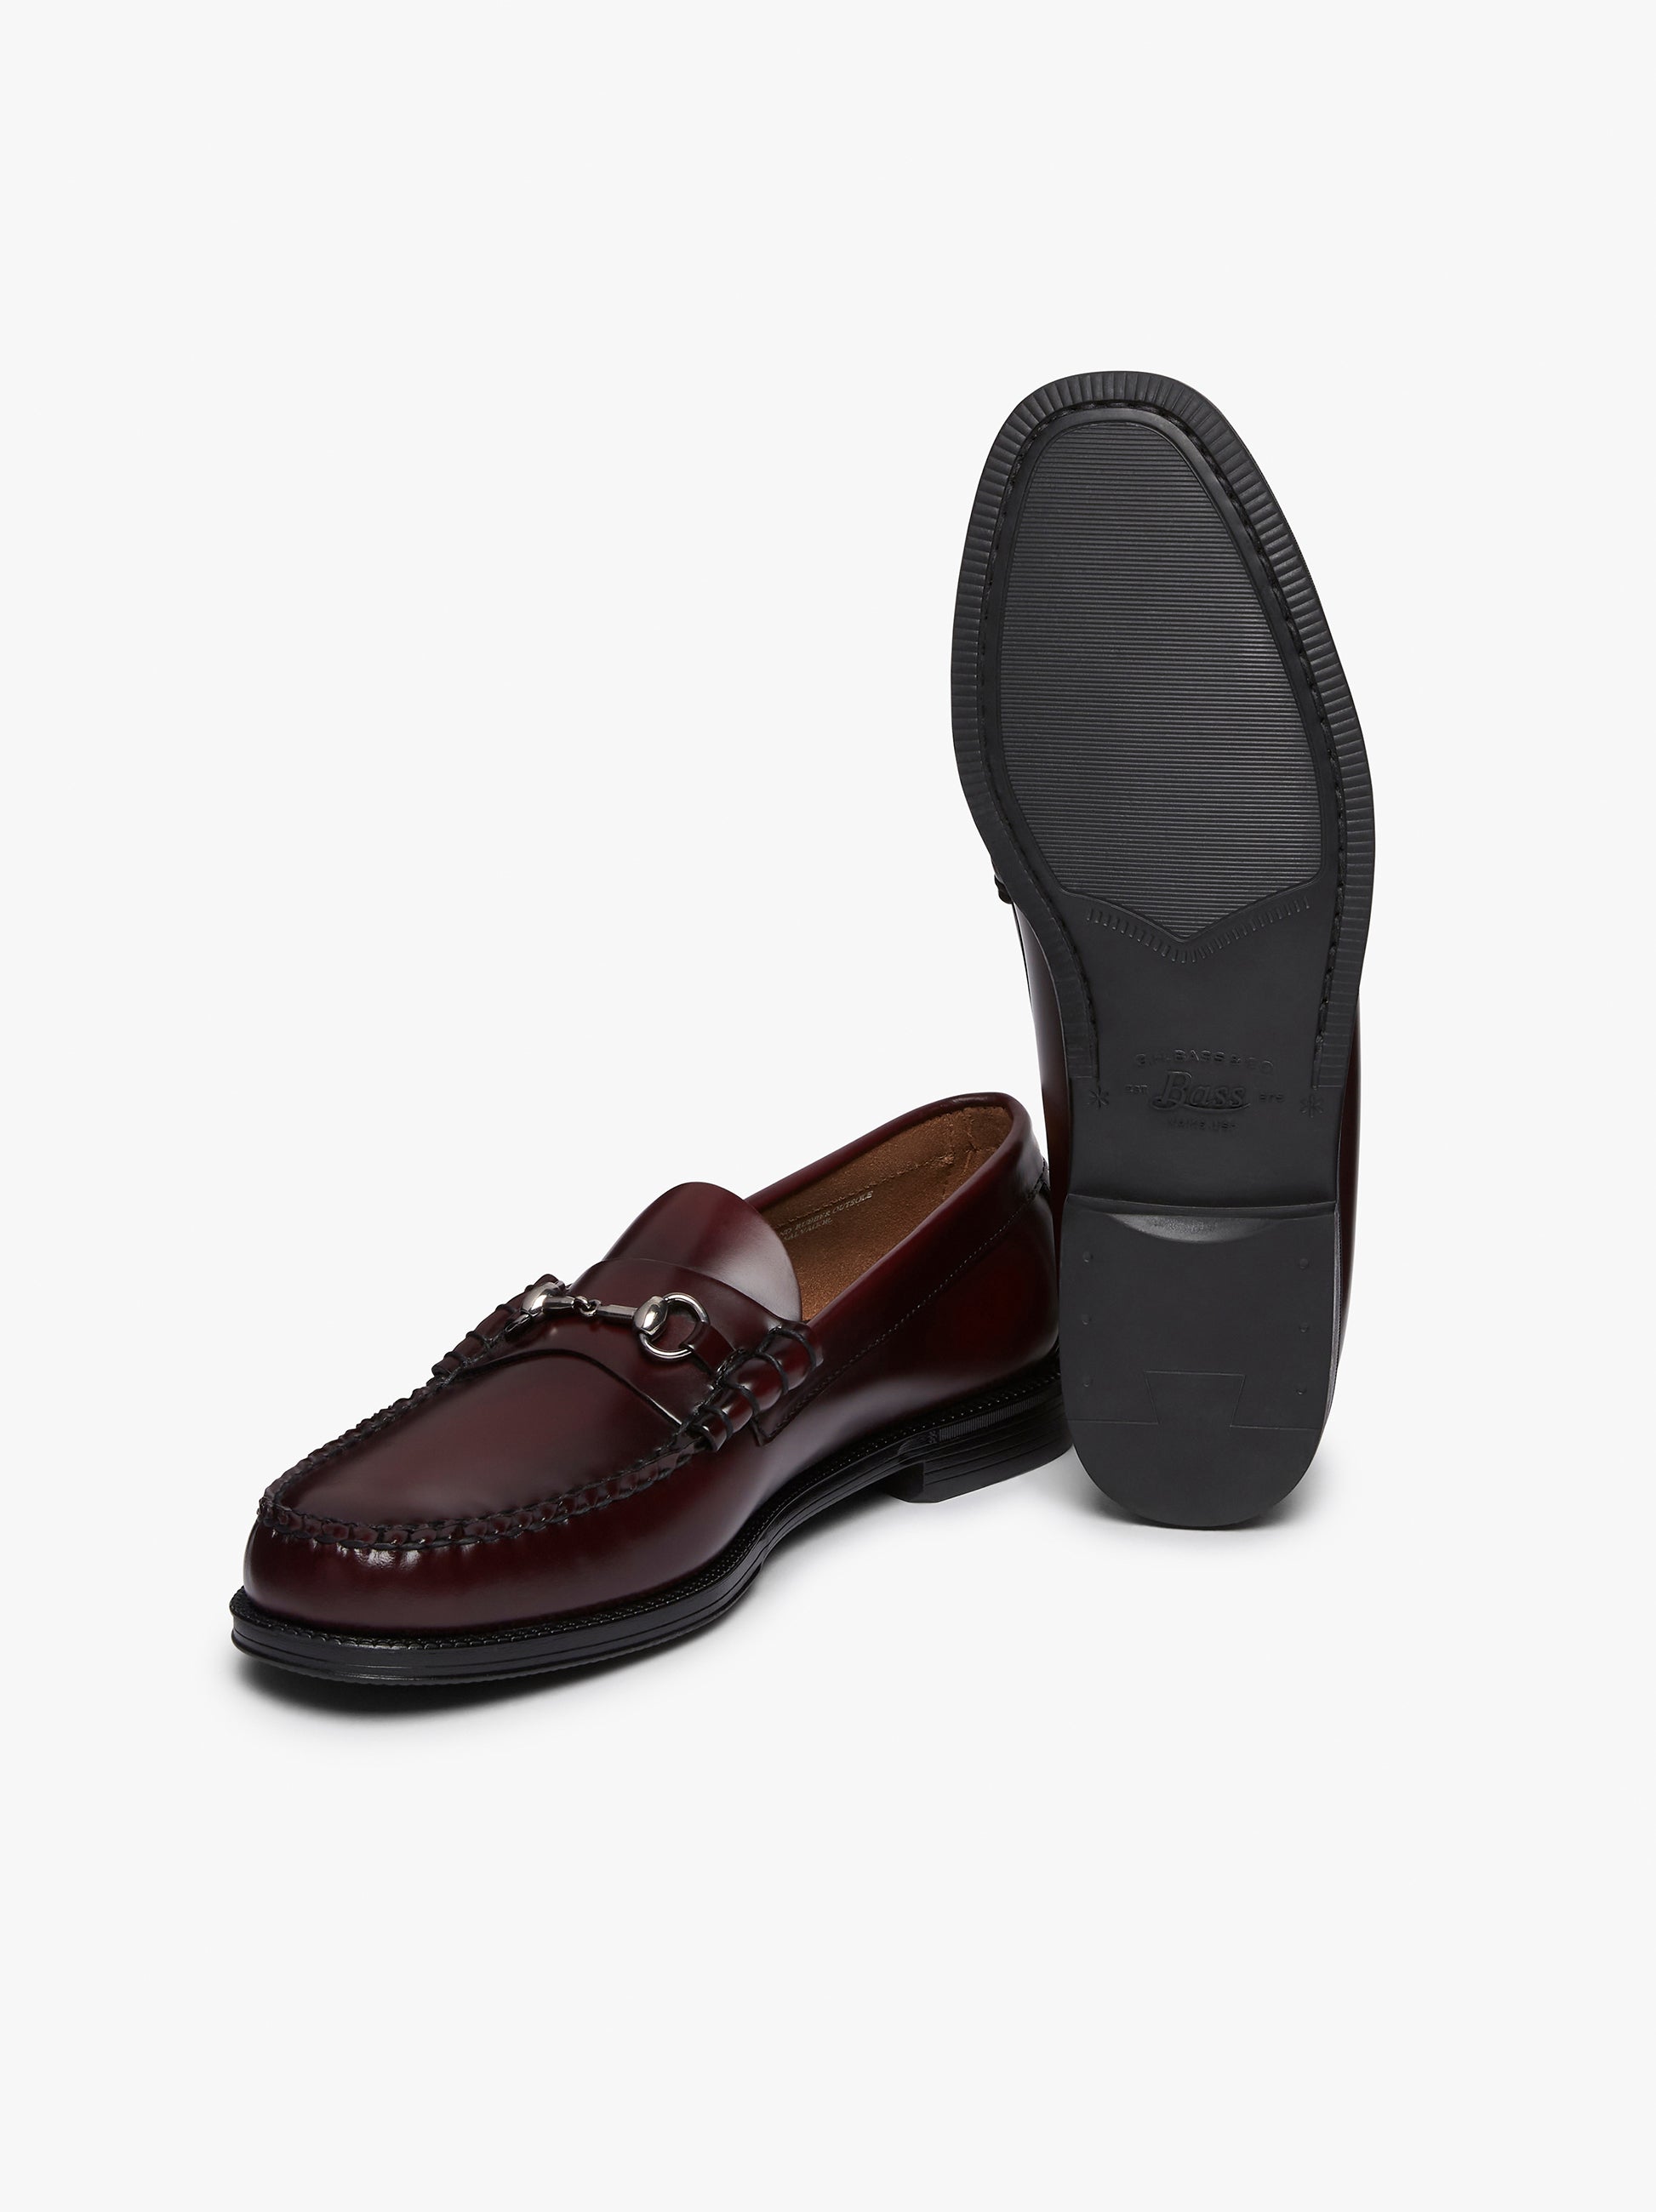 Wine Penny Loafers | Bass Weejuns Wine – G.H.BASS – G.H.BASS 1876